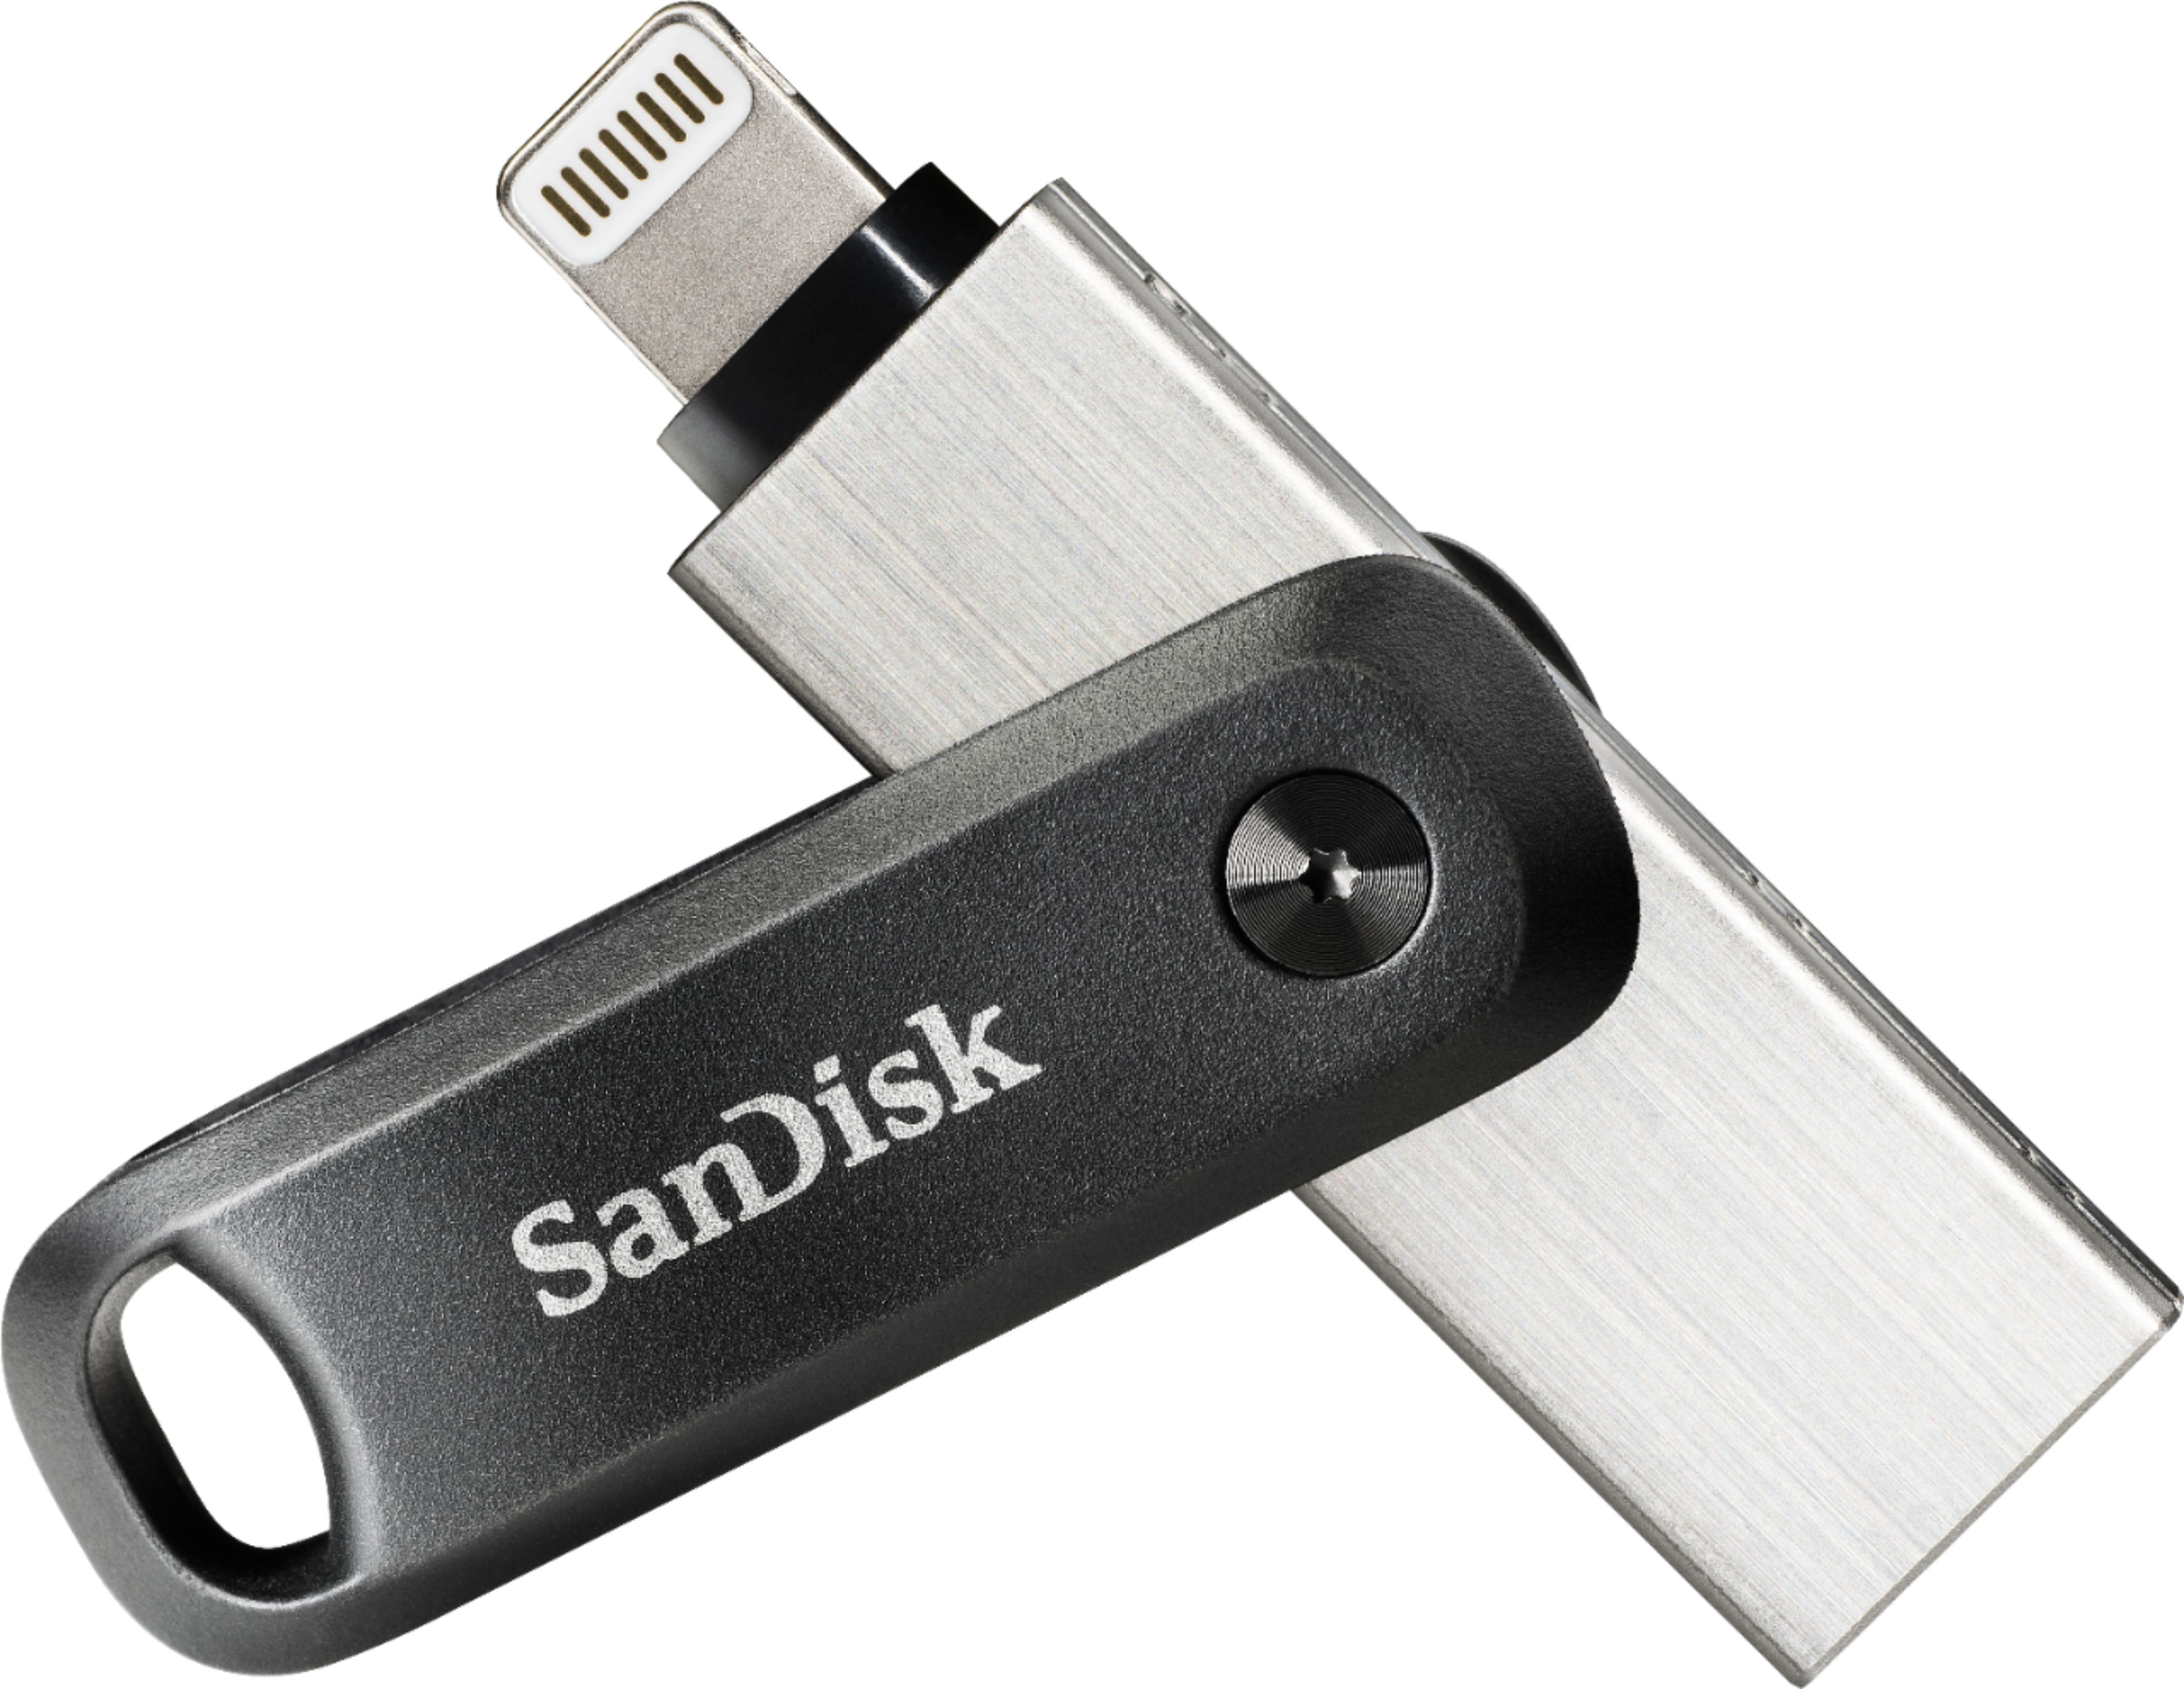 format type for usb that works on pc and mac